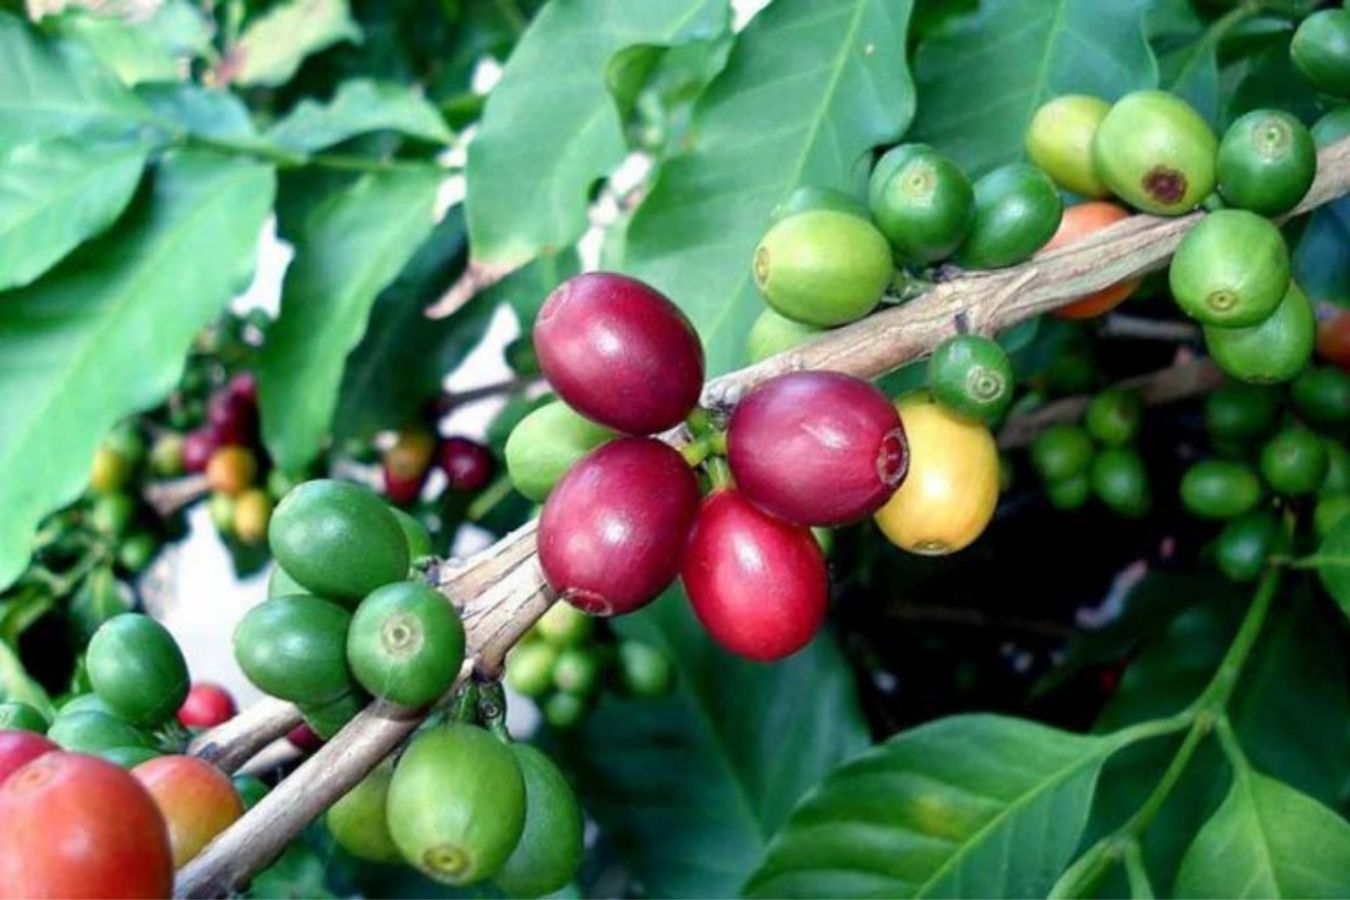 What Is Robusta Coffee – Learn About Robusta